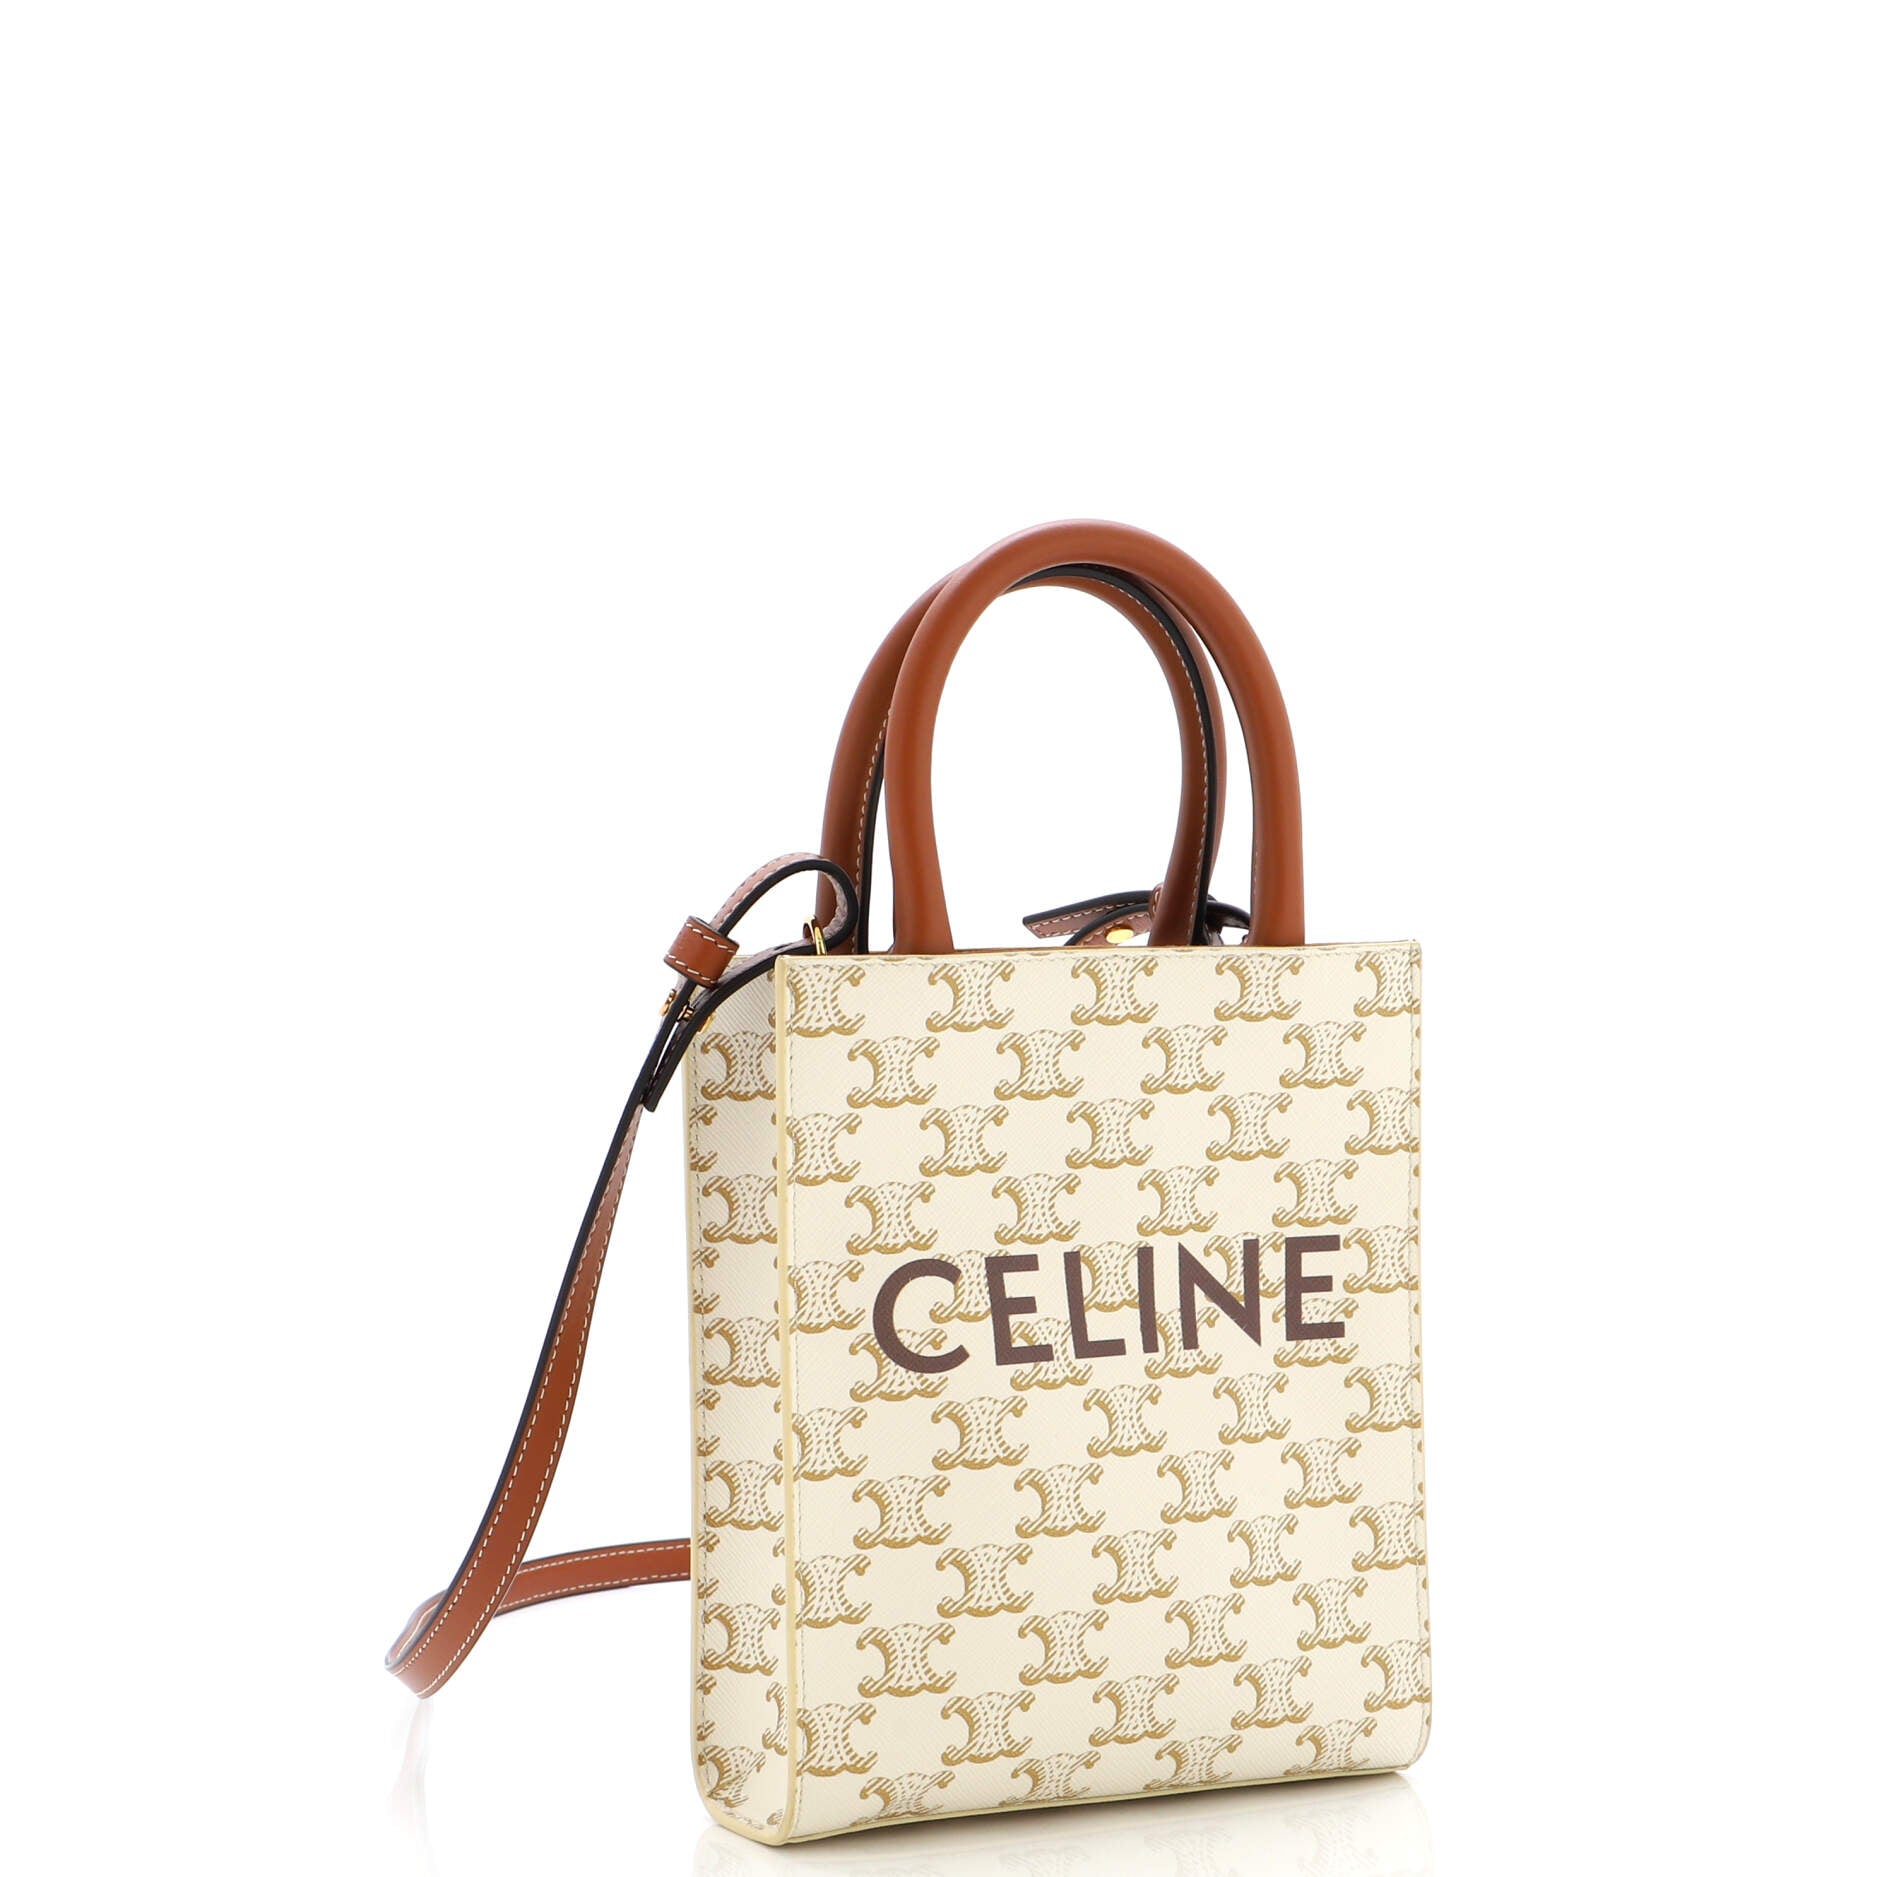 Celine - Mini Vertical Cabas in Triomphe Canvas and Calfskin White for Women - 24S